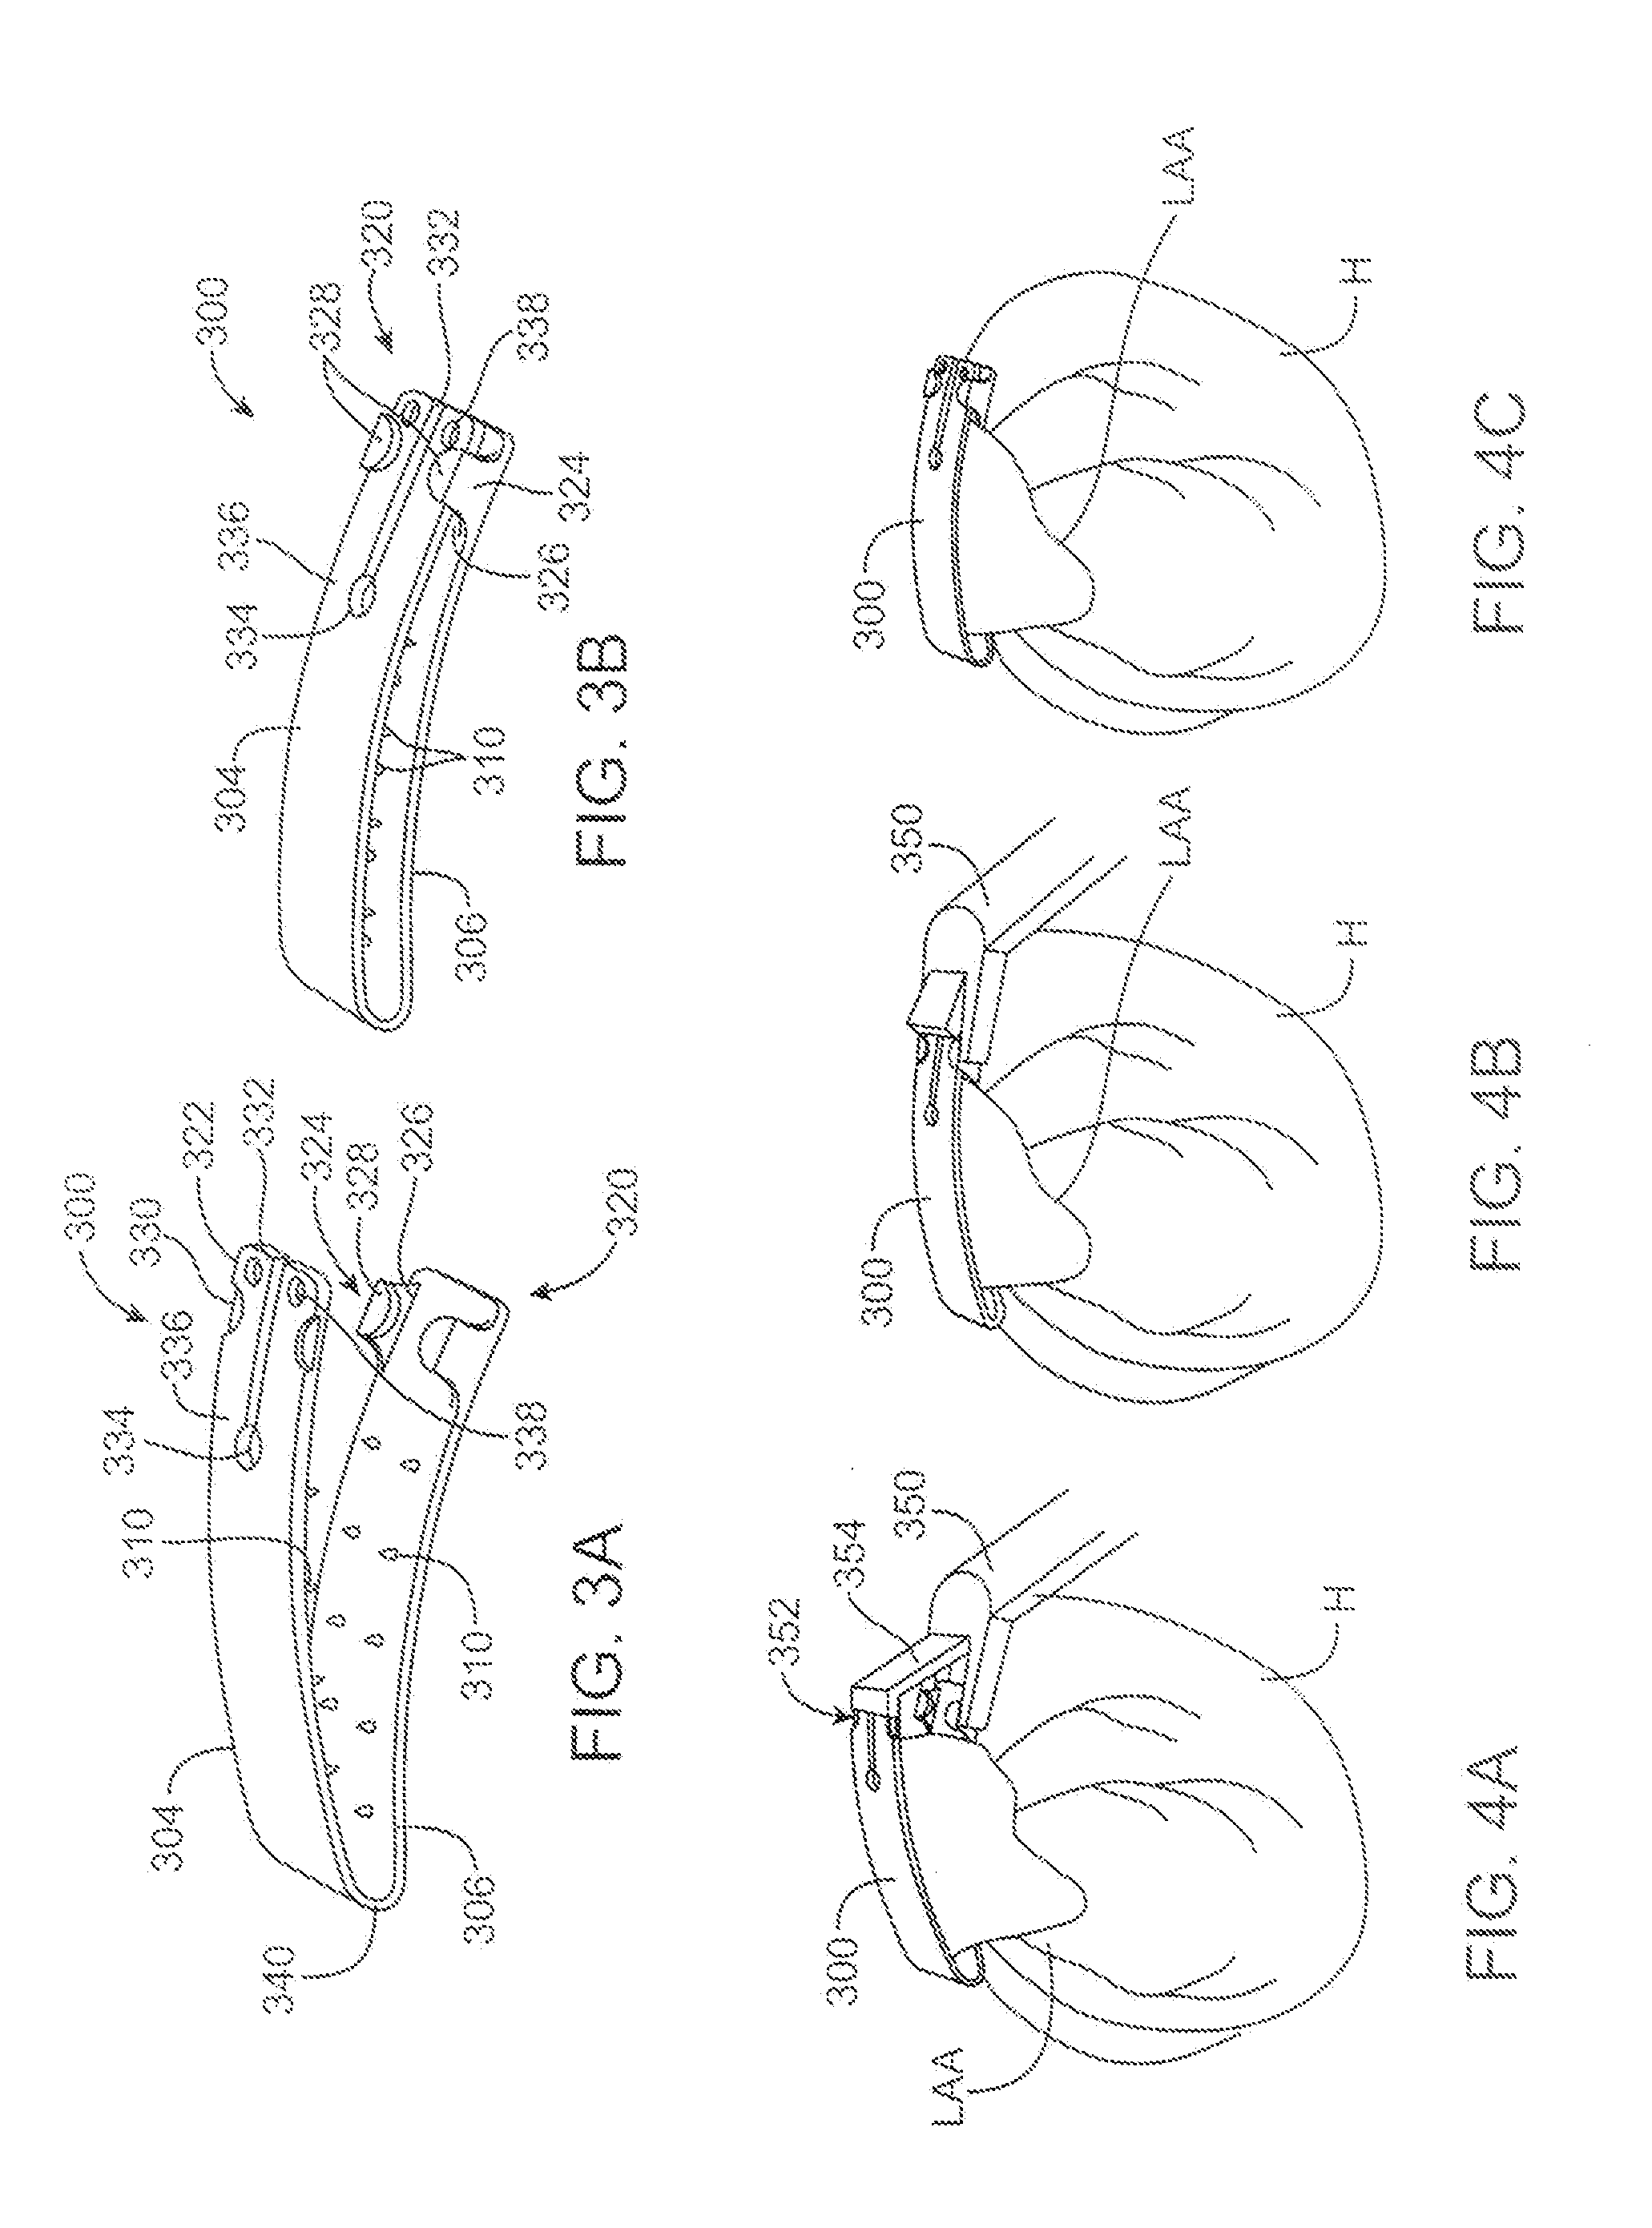 Left atrial appendage devices and methods